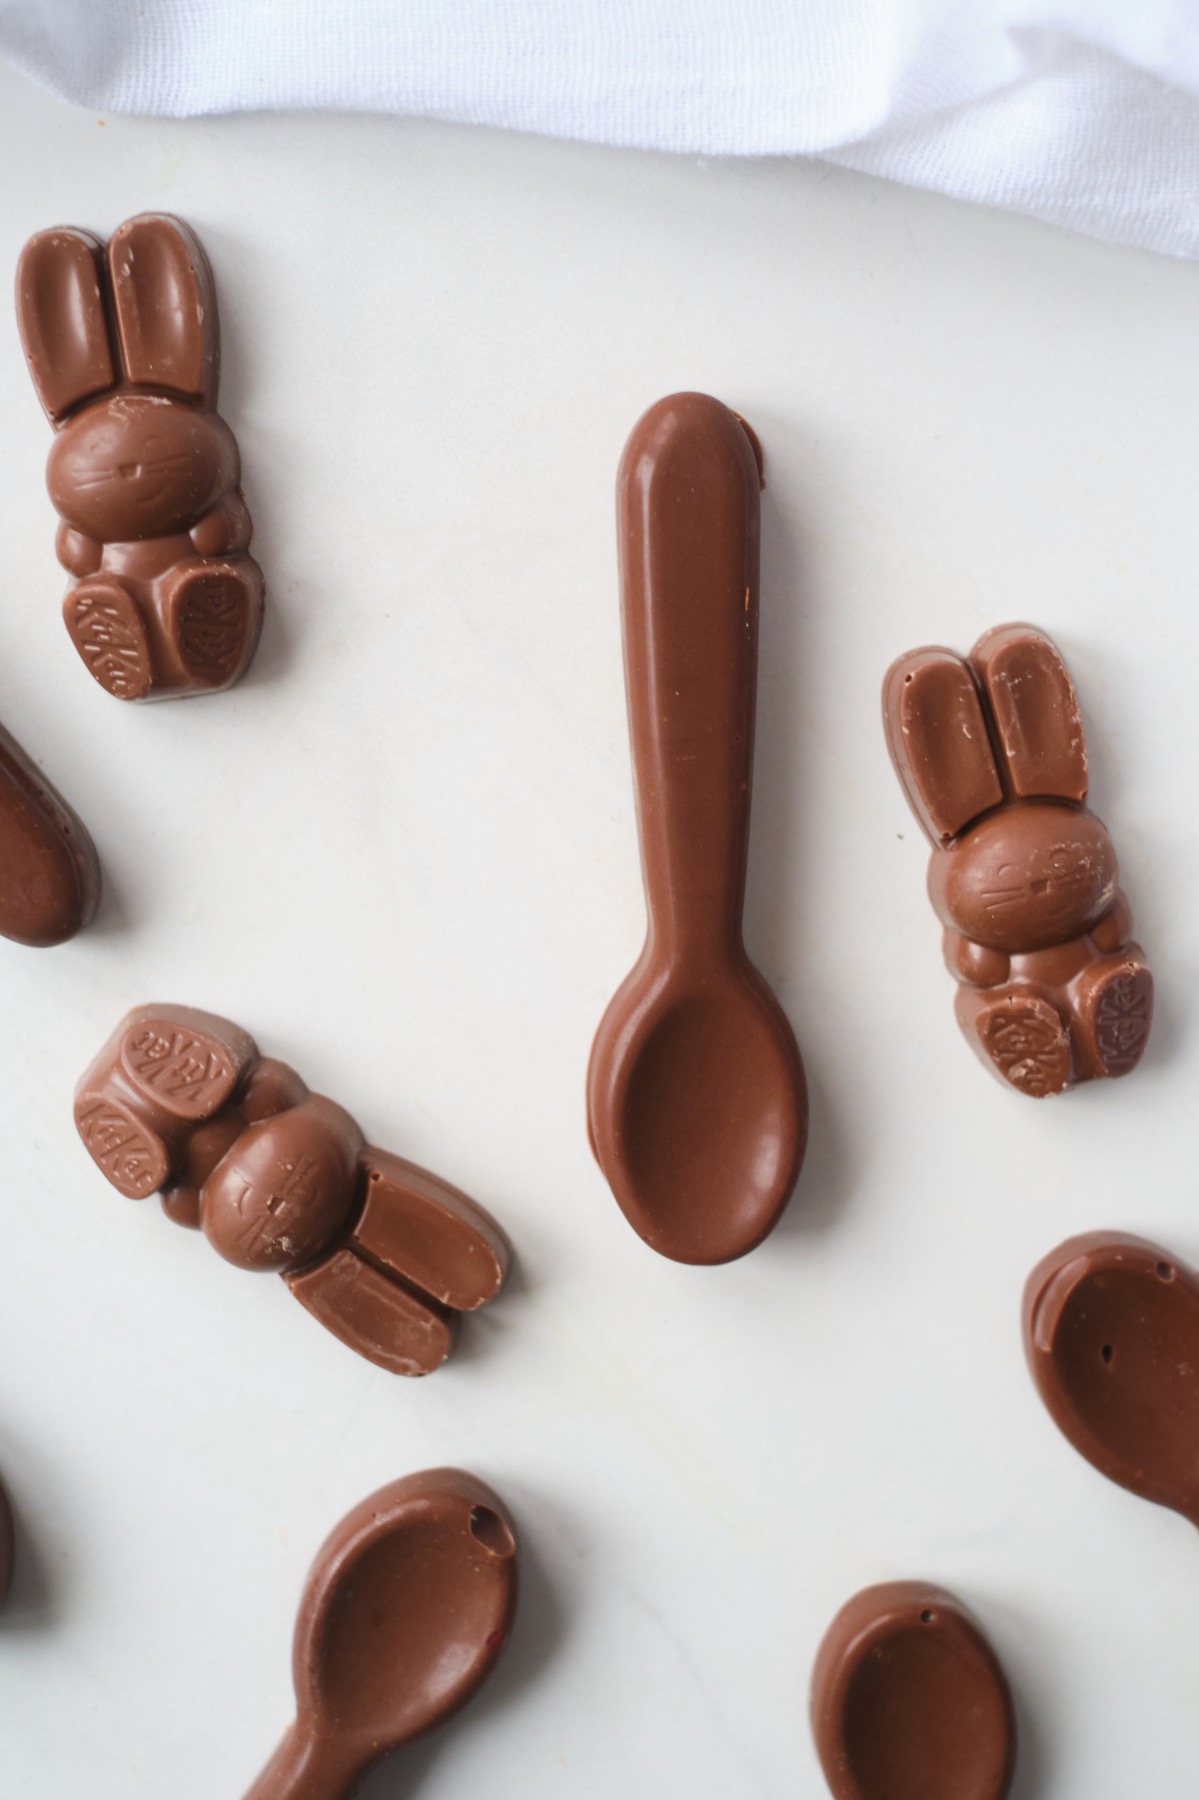 detail of chocolate spoons and bunnies pop shop america